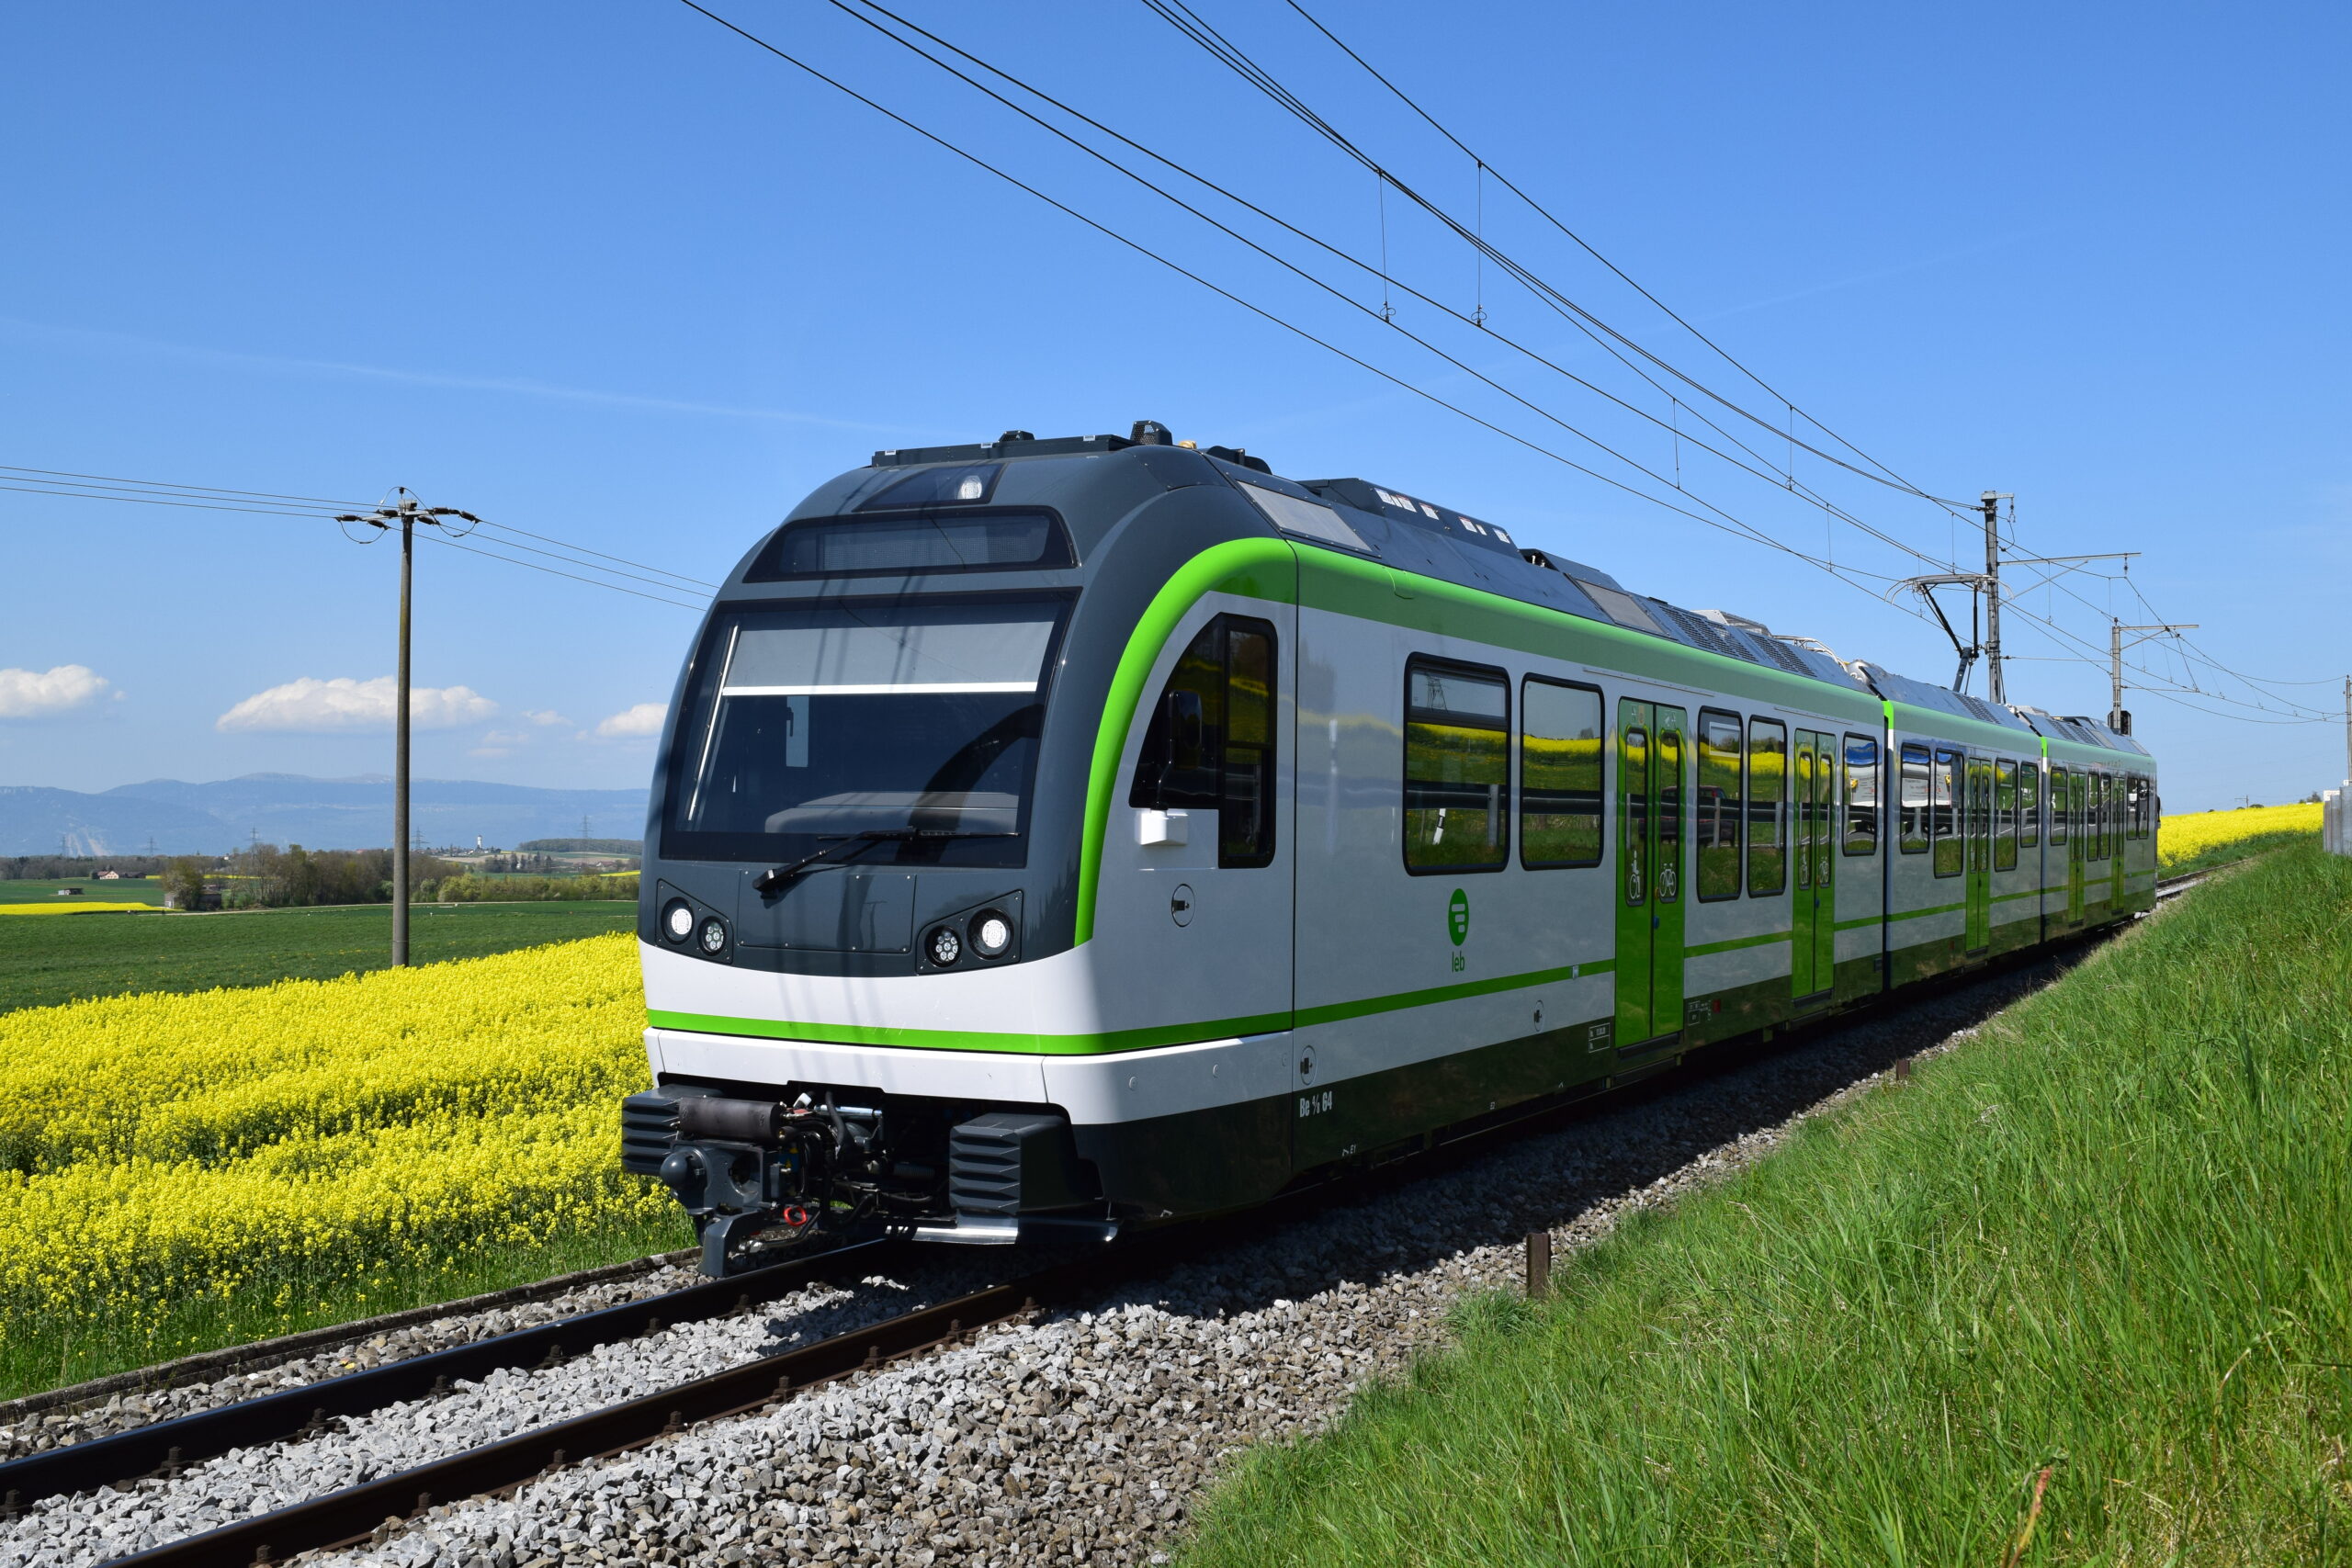 LEB strengthens local transport services with four new tailor-made multiple-unit trains from Stadler